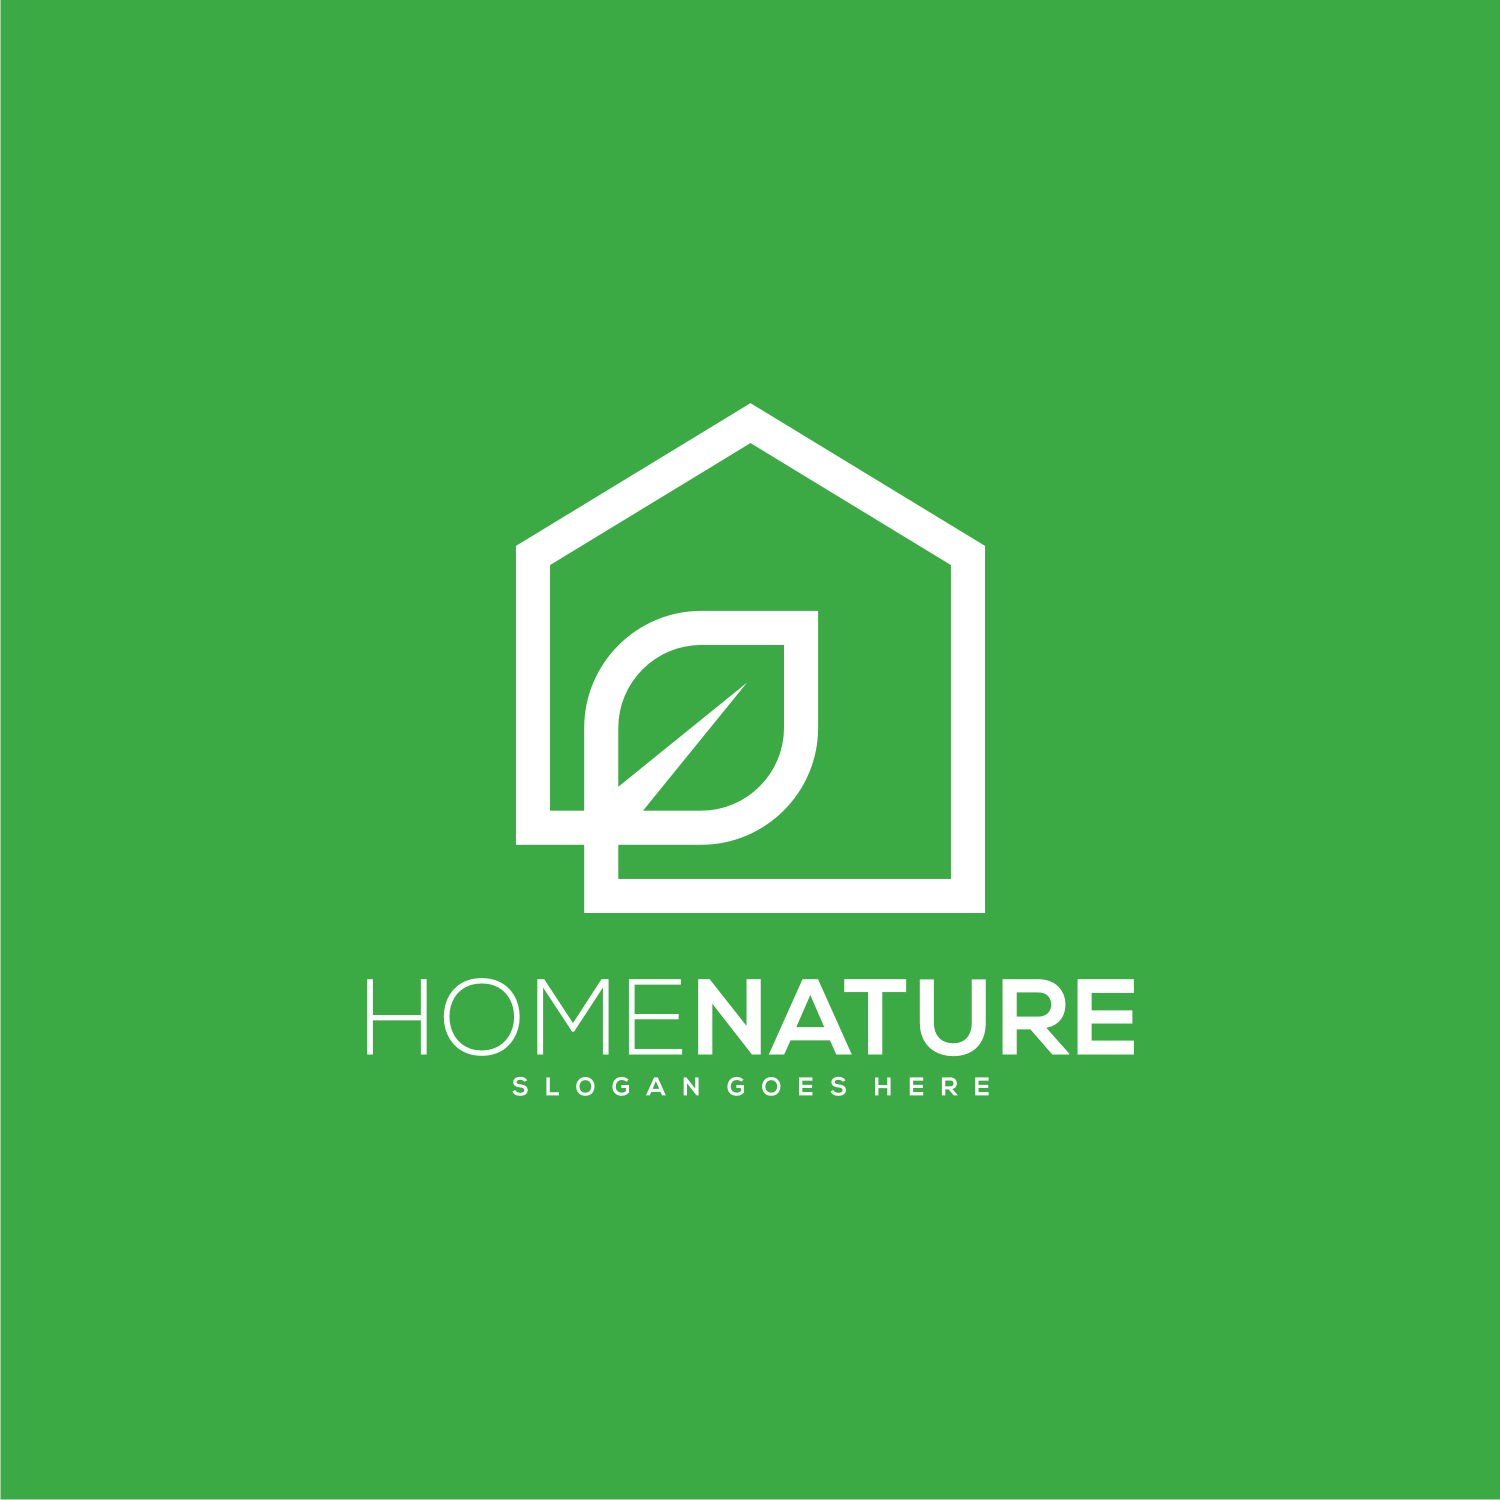 Home Nature Logo Beautiful Vector Design Preview Image.